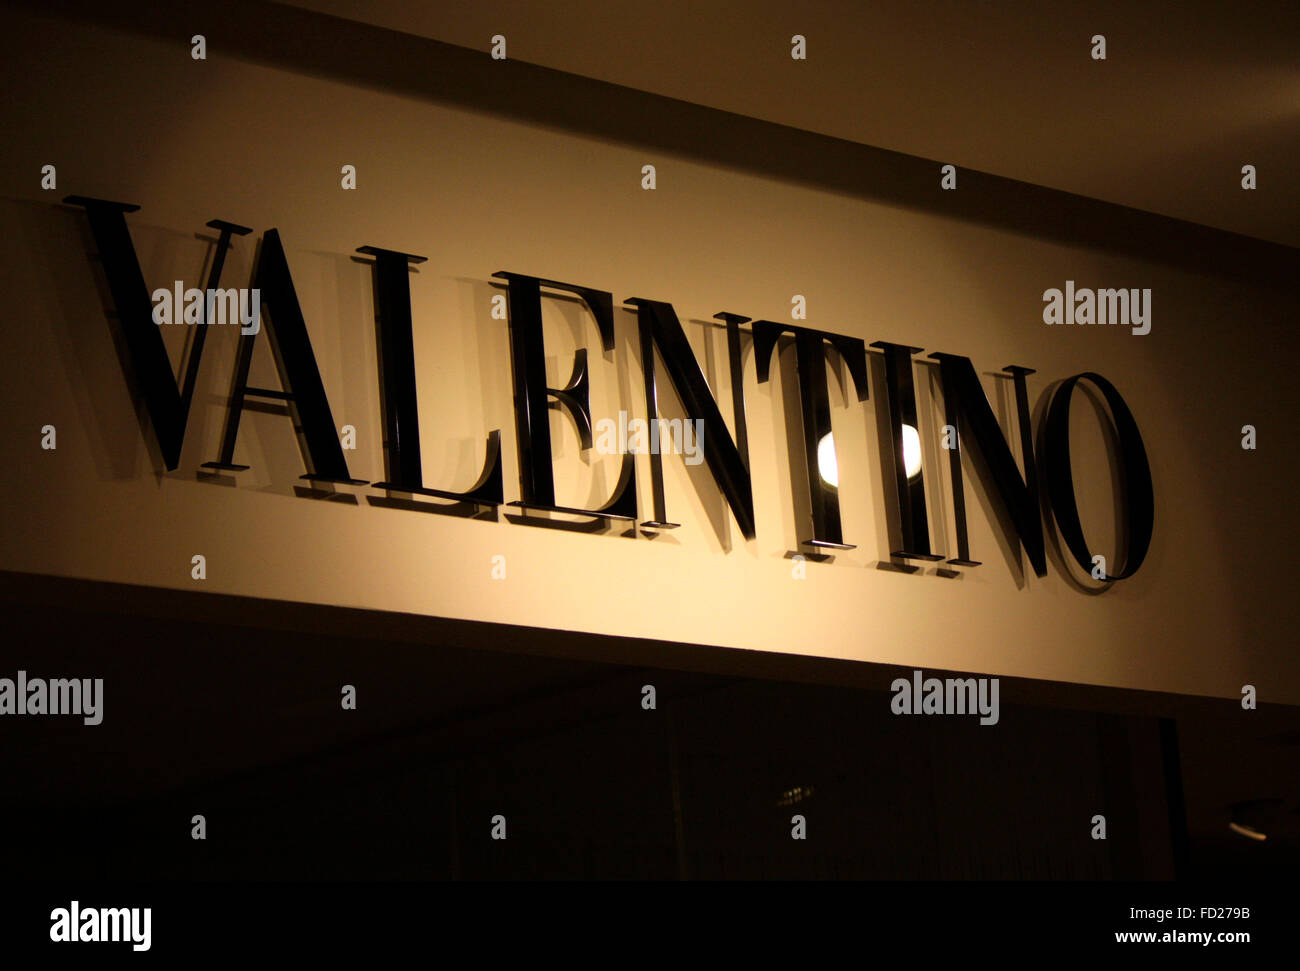 Valentino Logo High Resolution Stock Photography and Images - Alamy